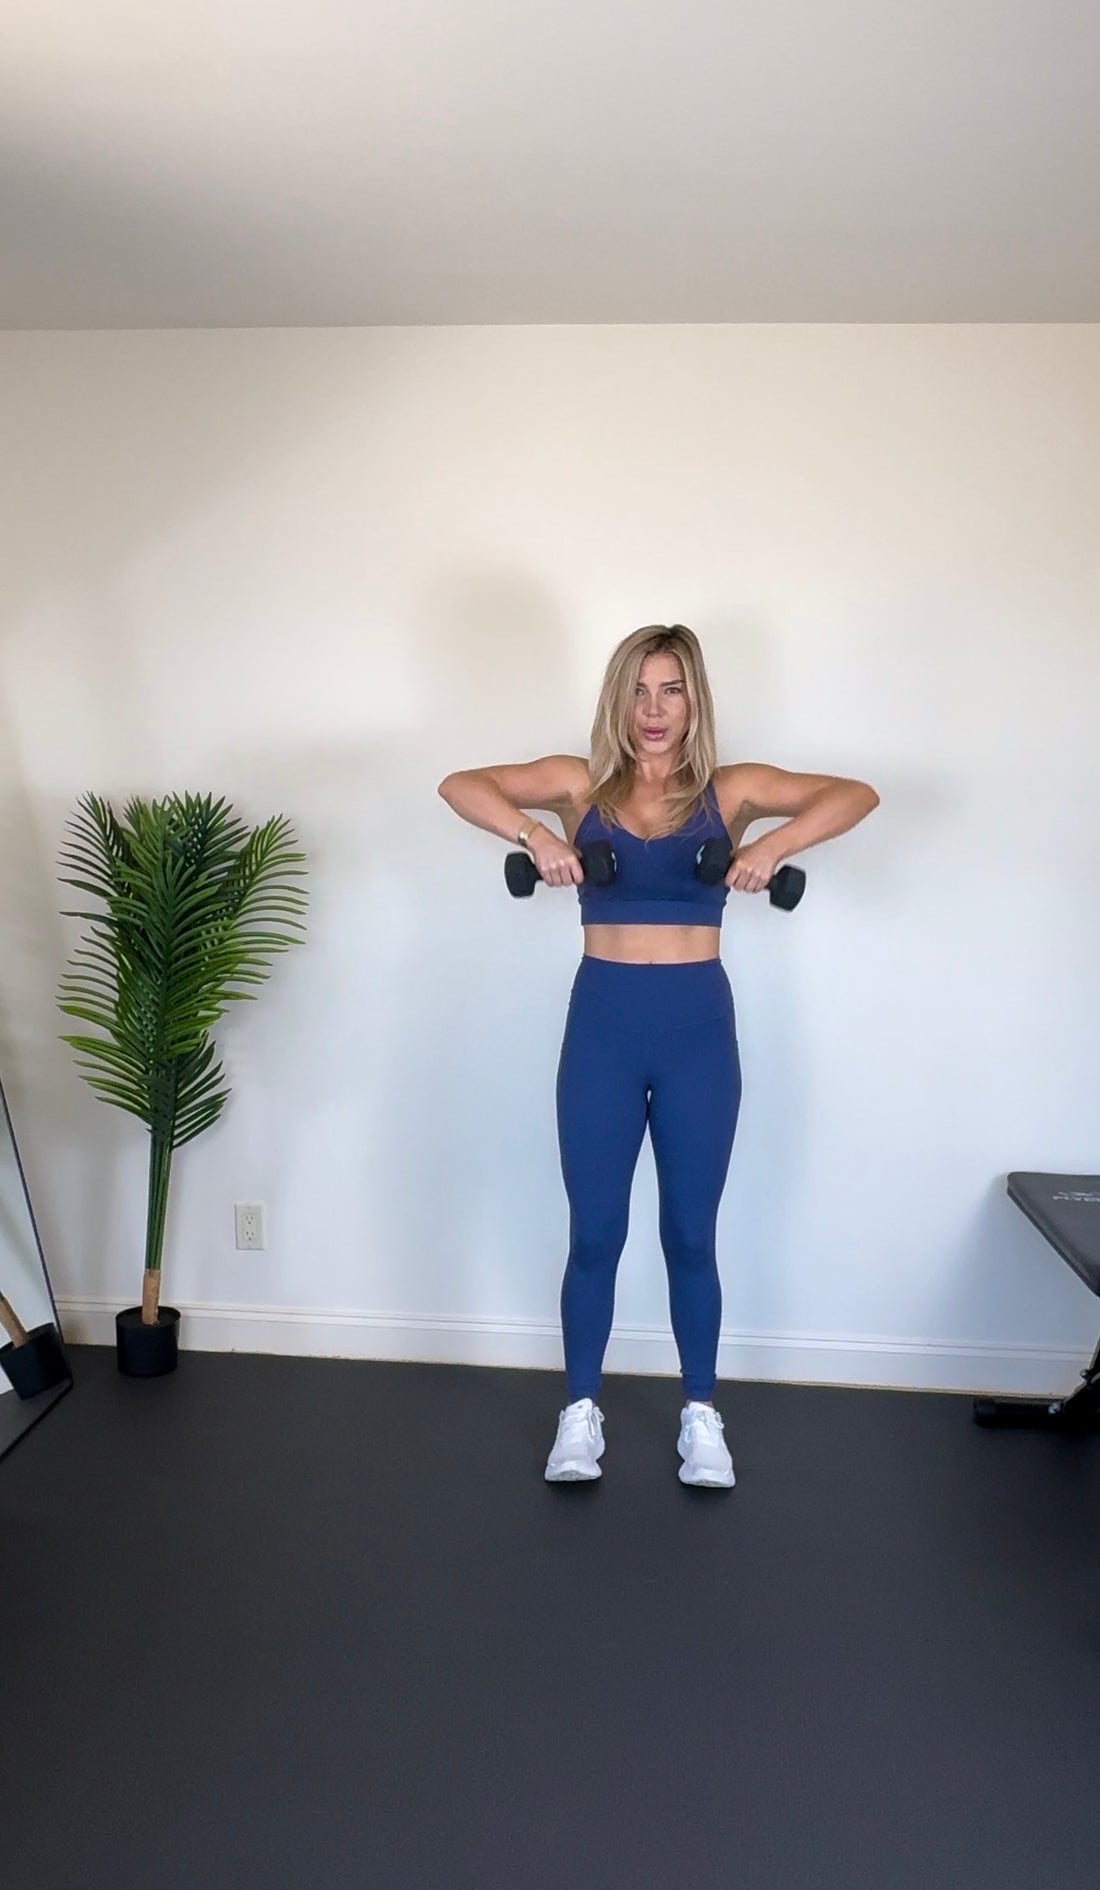 Full Body Combination Workout With Dumbbells 🏋🏼‍♀️😅